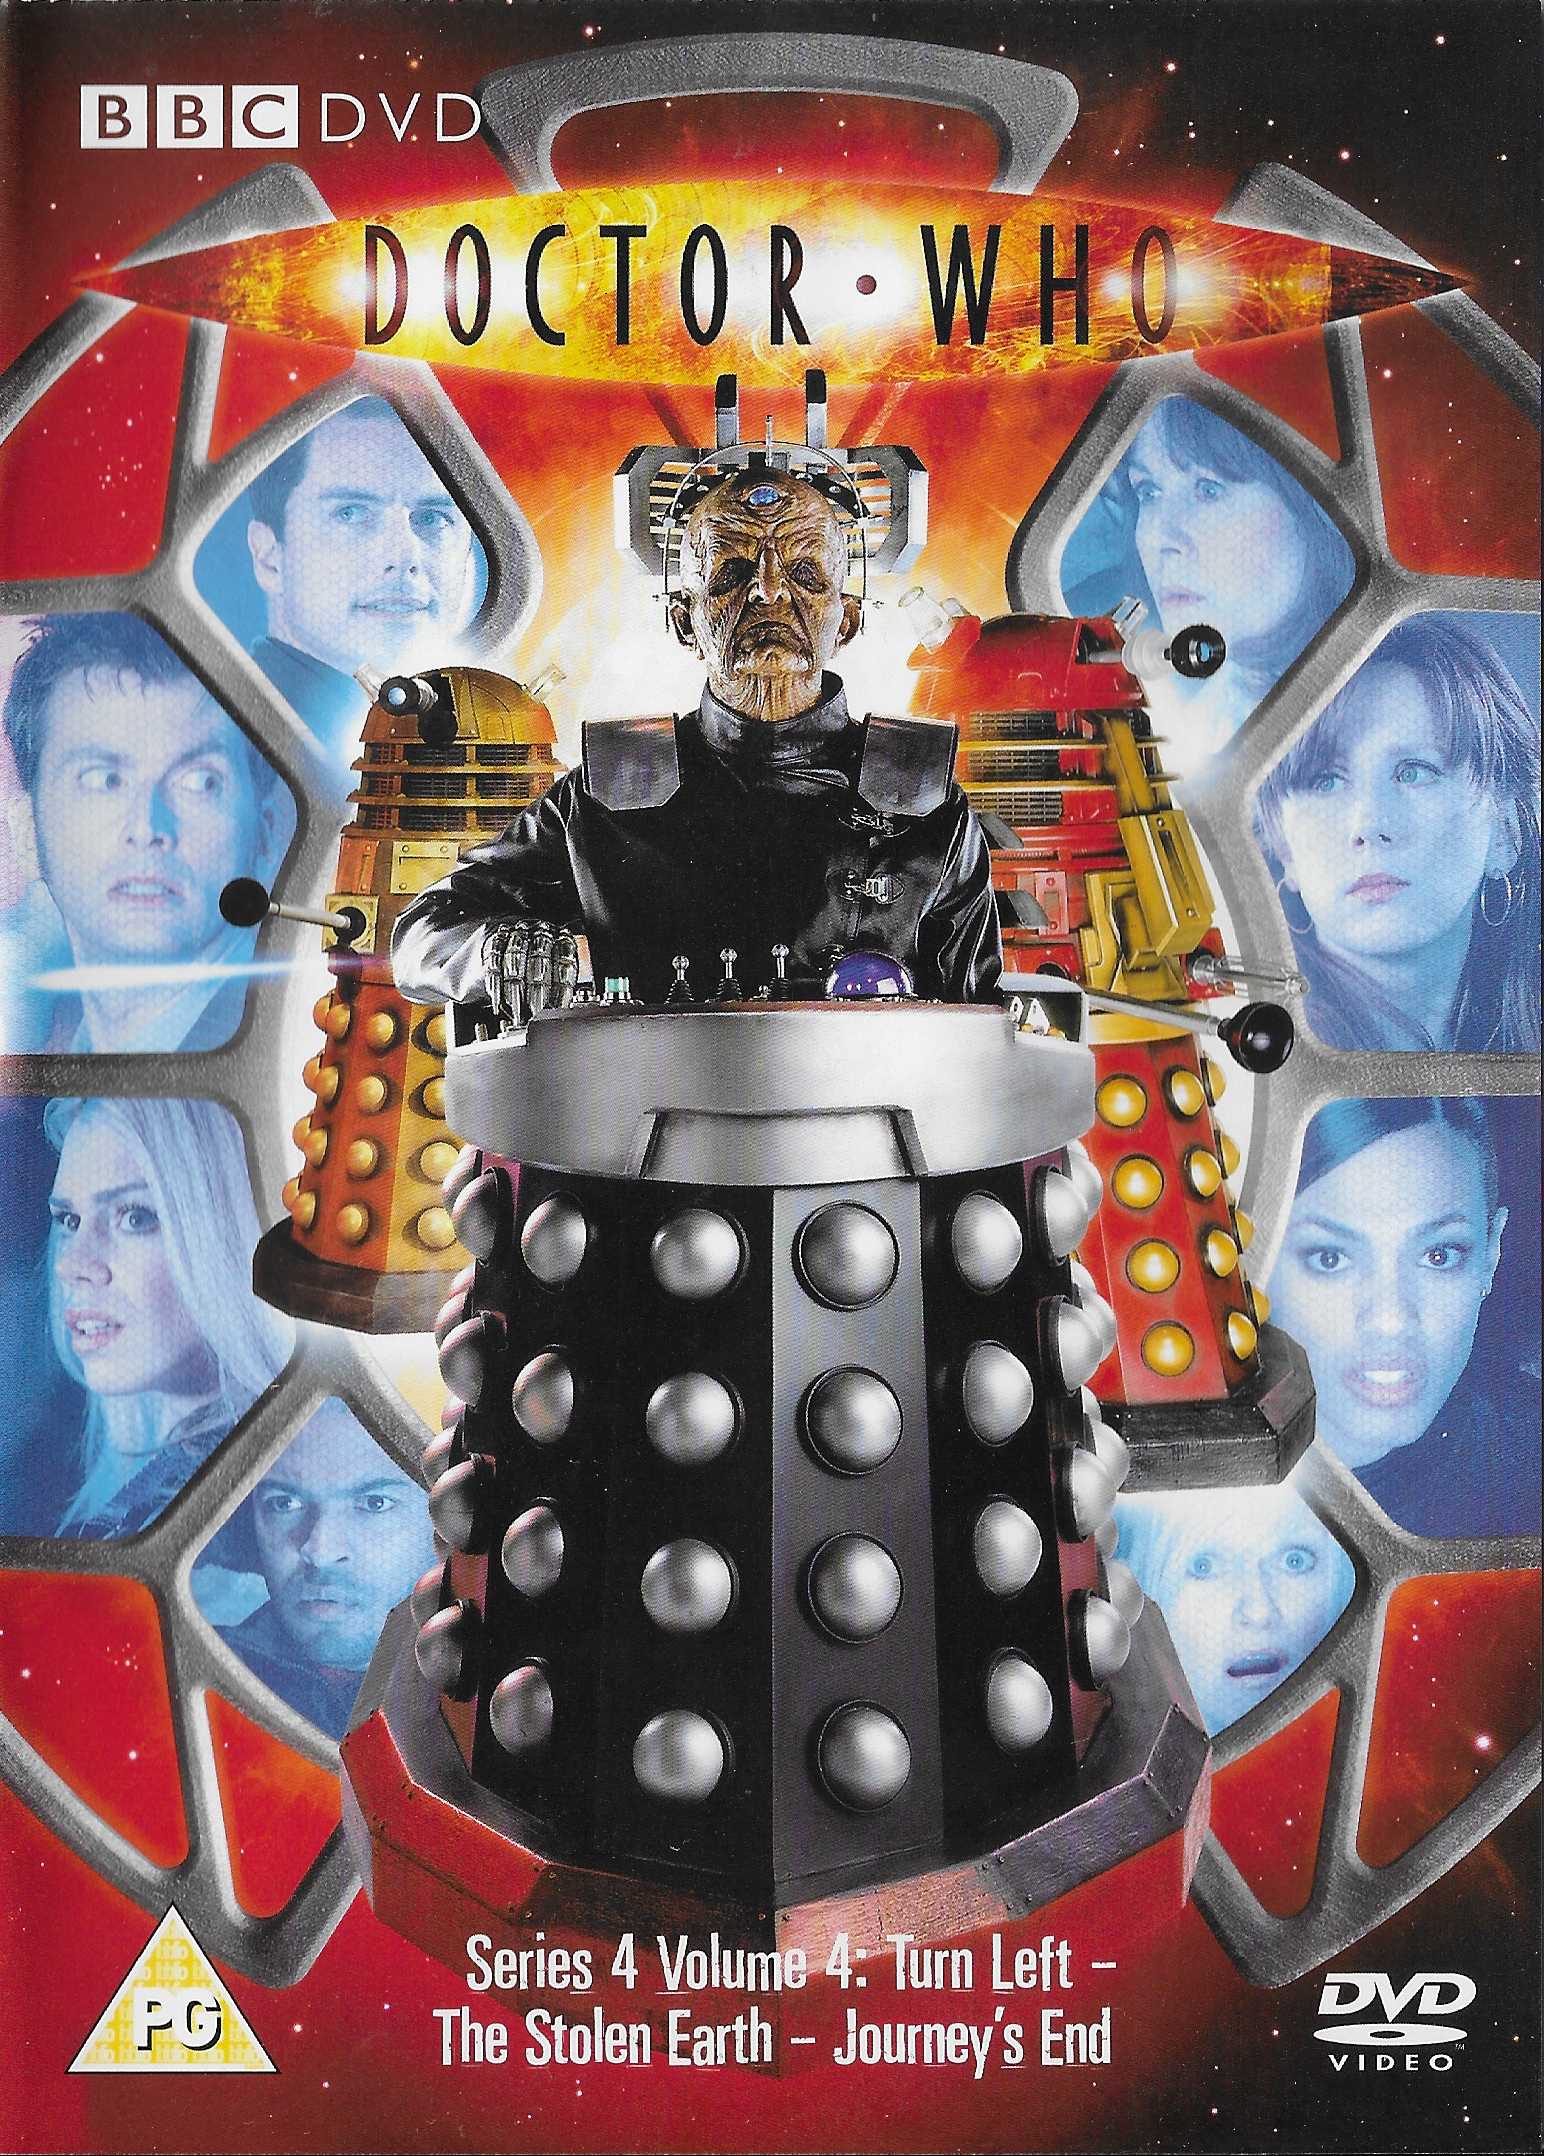 Picture of BBCDVD 2608 Doctor Who - Series 4, volume 4 by artist Russell T Davies from the BBC dvds - Records and Tapes library